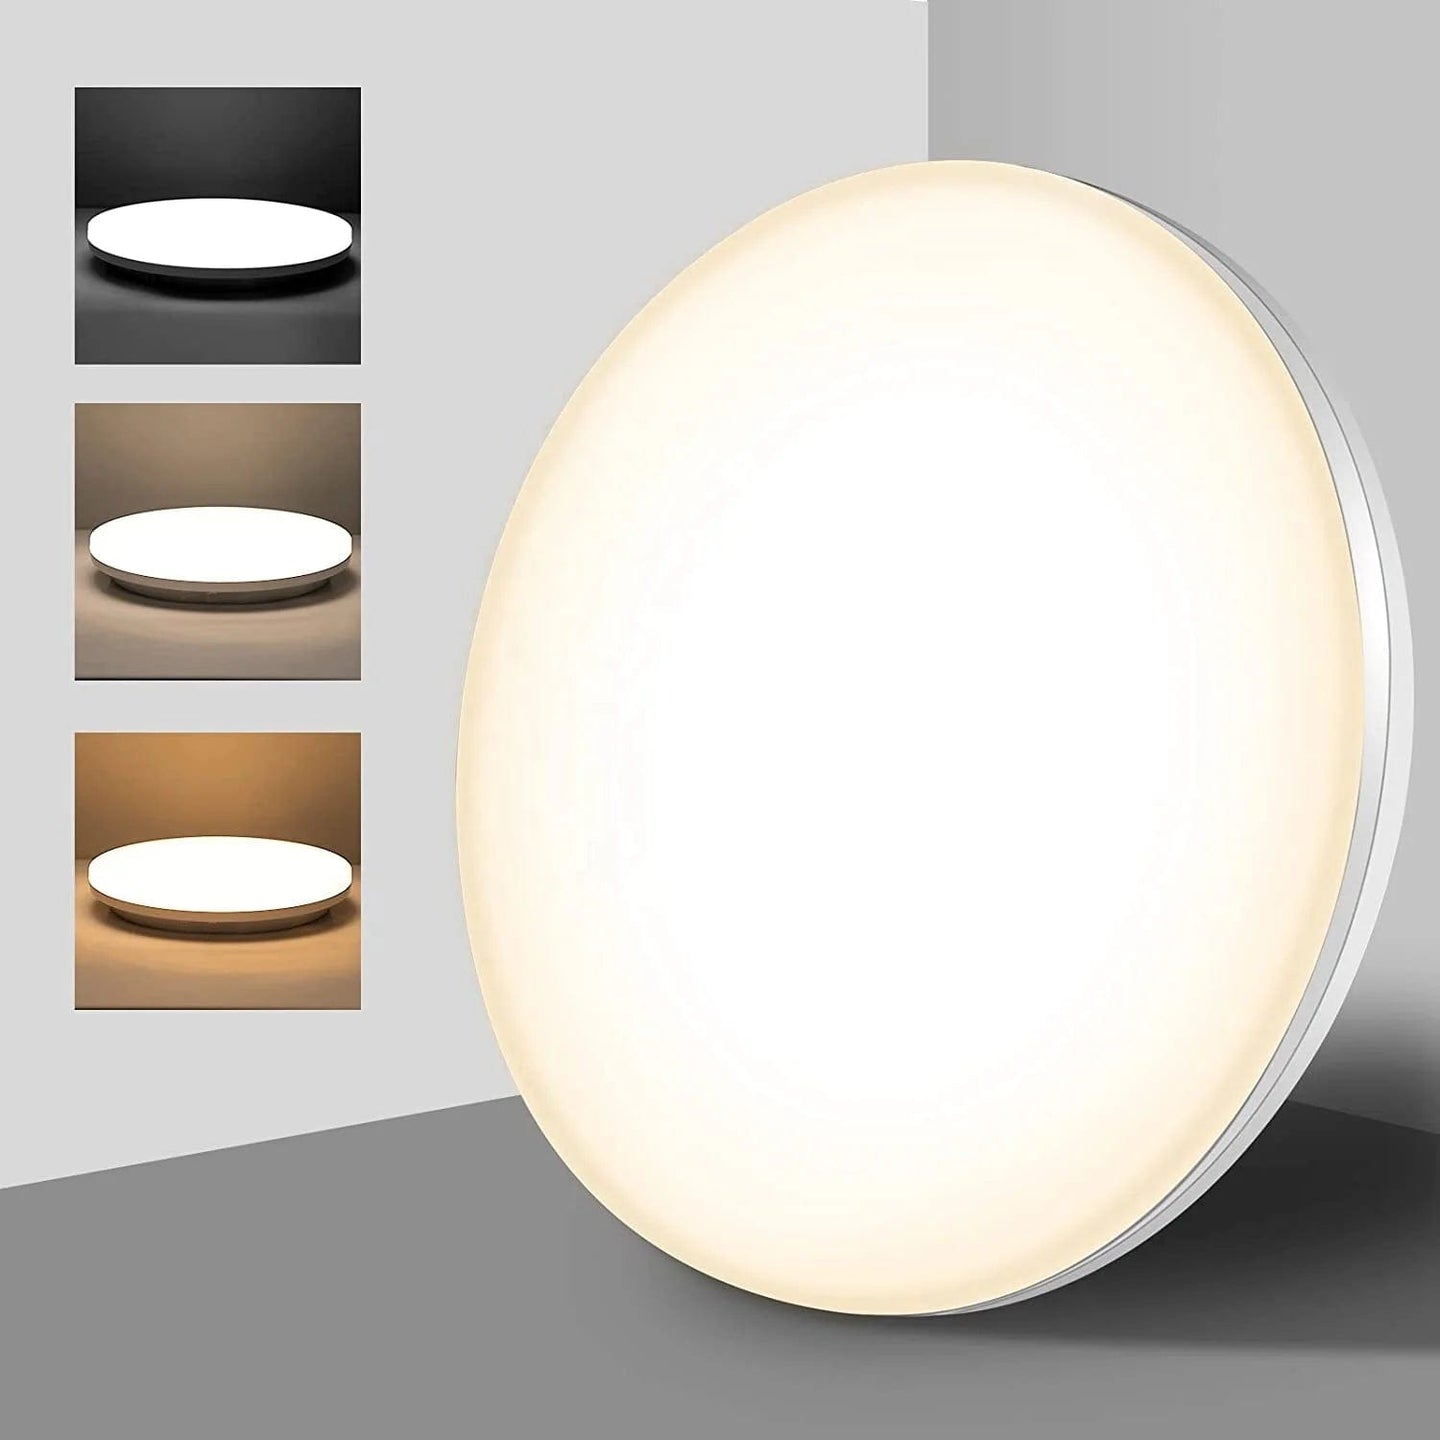 Smart Sophistication: LED Smart Bedroom Ceiling Light - Contemporary Design with Black and White Finish